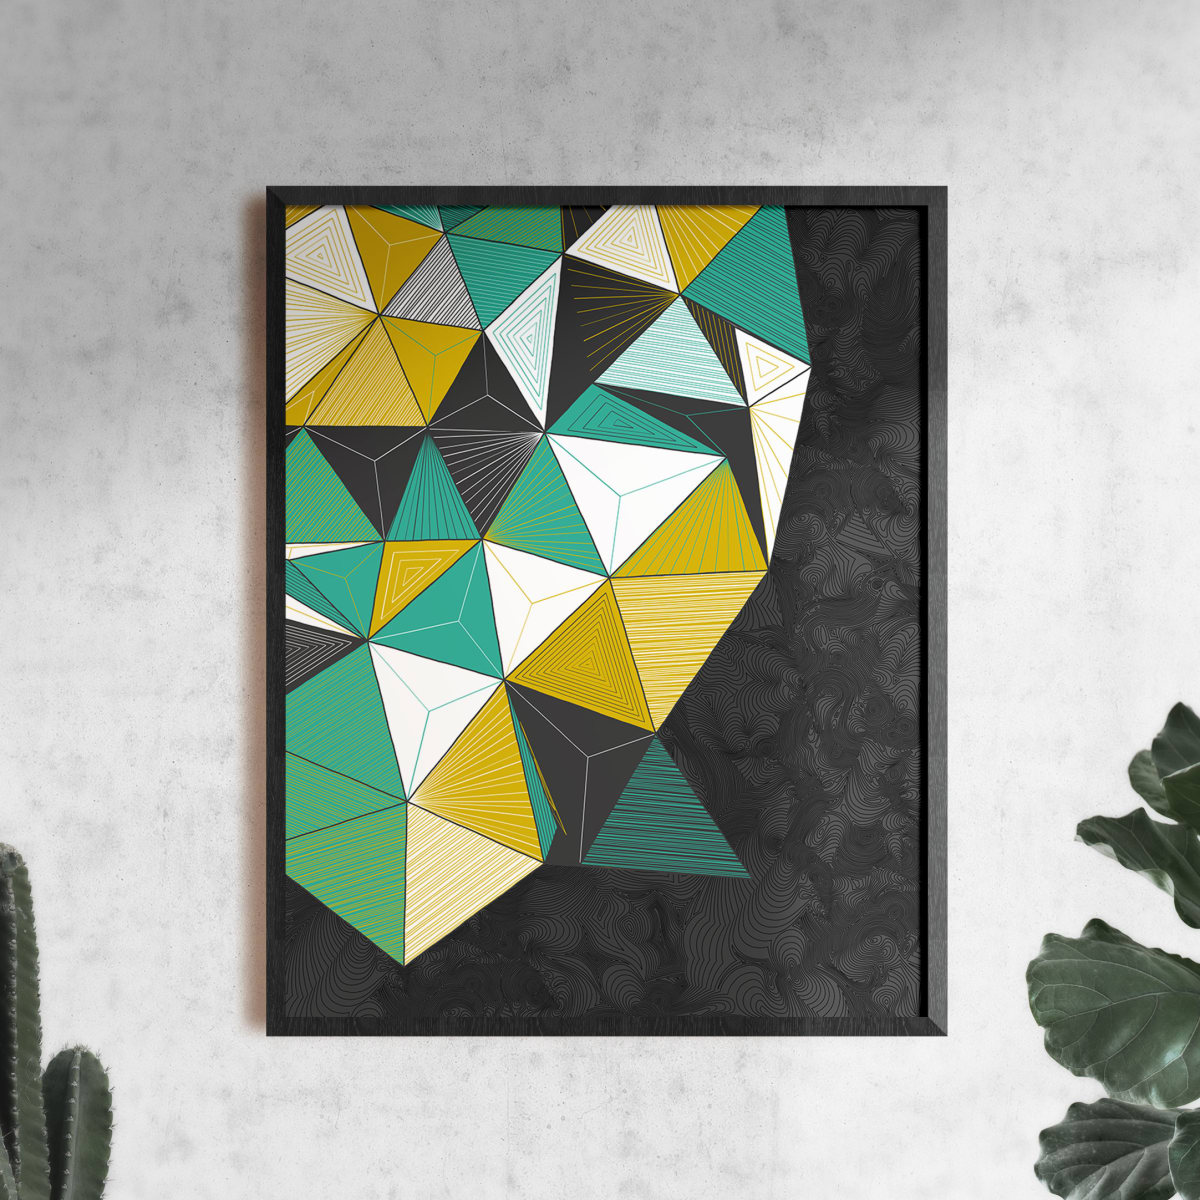 "Conscious Growth 076" Large One-of-a-Kind Print by Debbie Clapper  Image: Conscious Growth Print 076, a yellow, green, black and white one of a kind archival modern art print